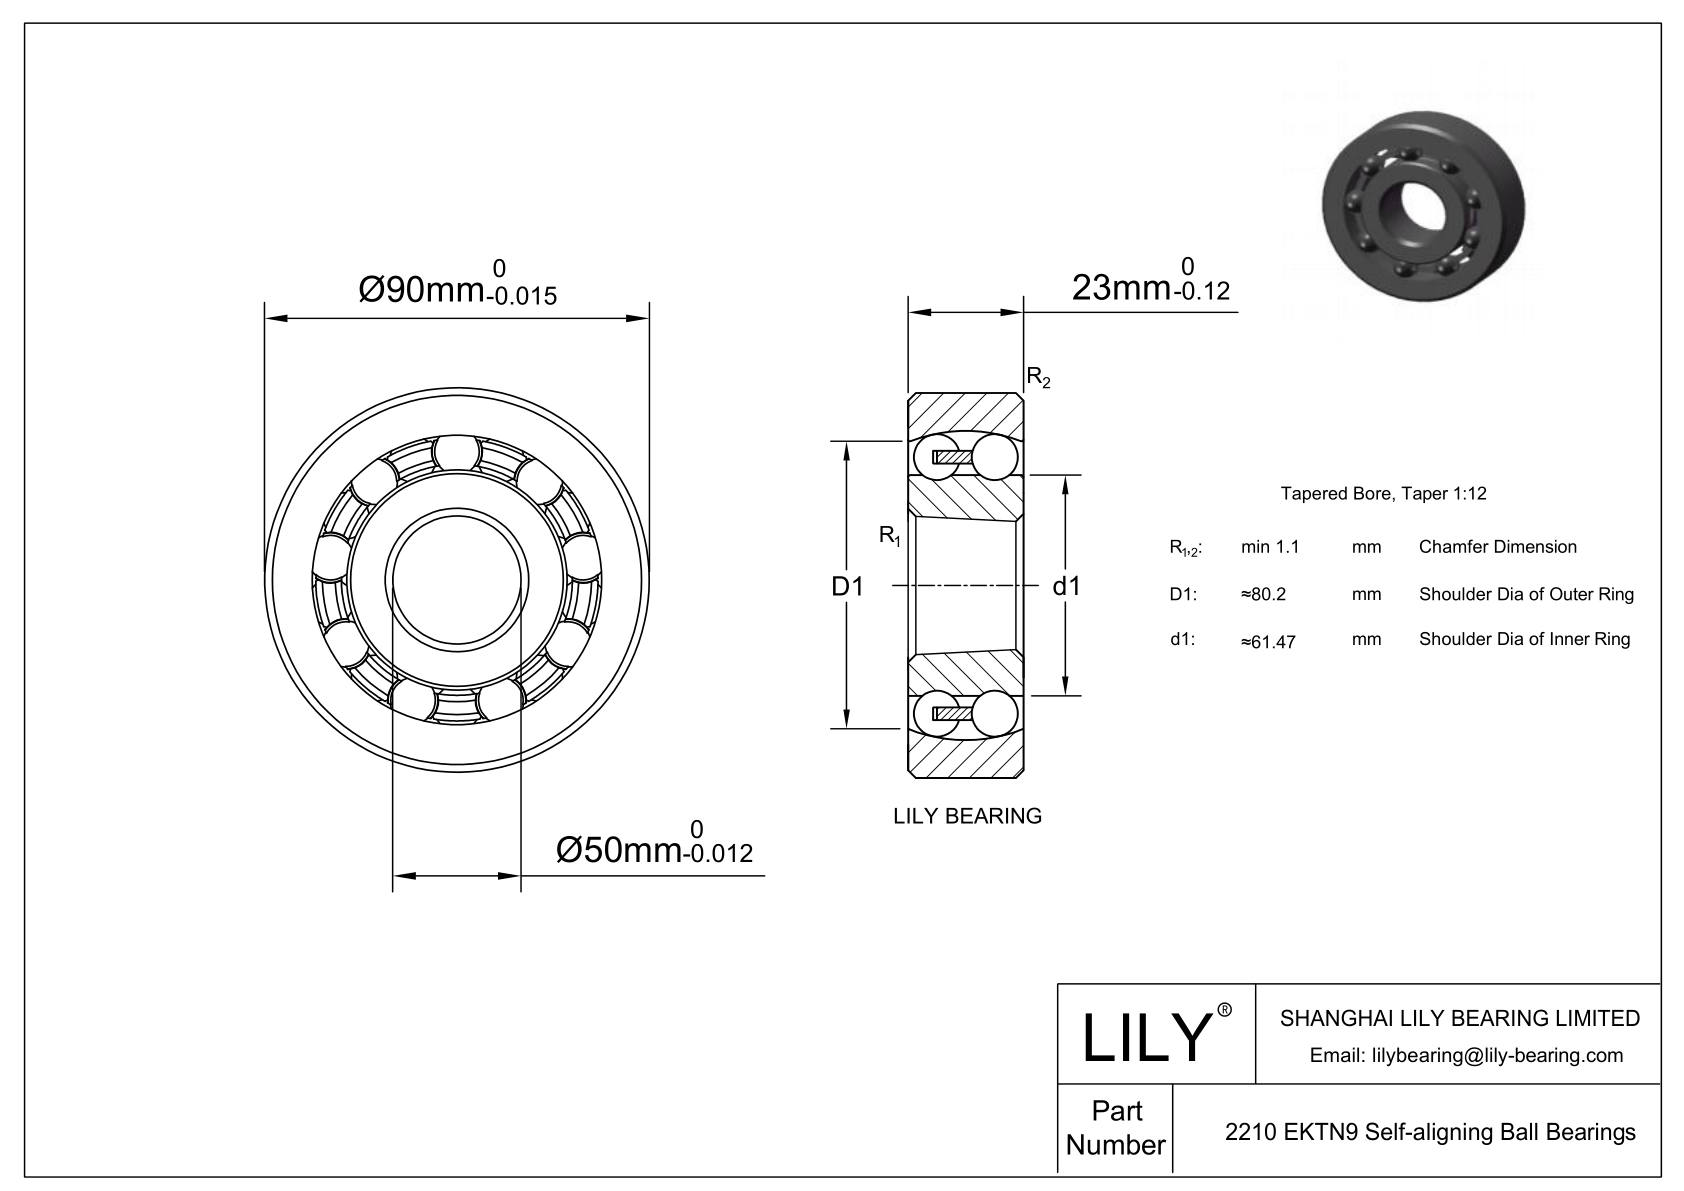 CE2210SC Silicon Carbide Self Aligning Ball Bearings cad drawing